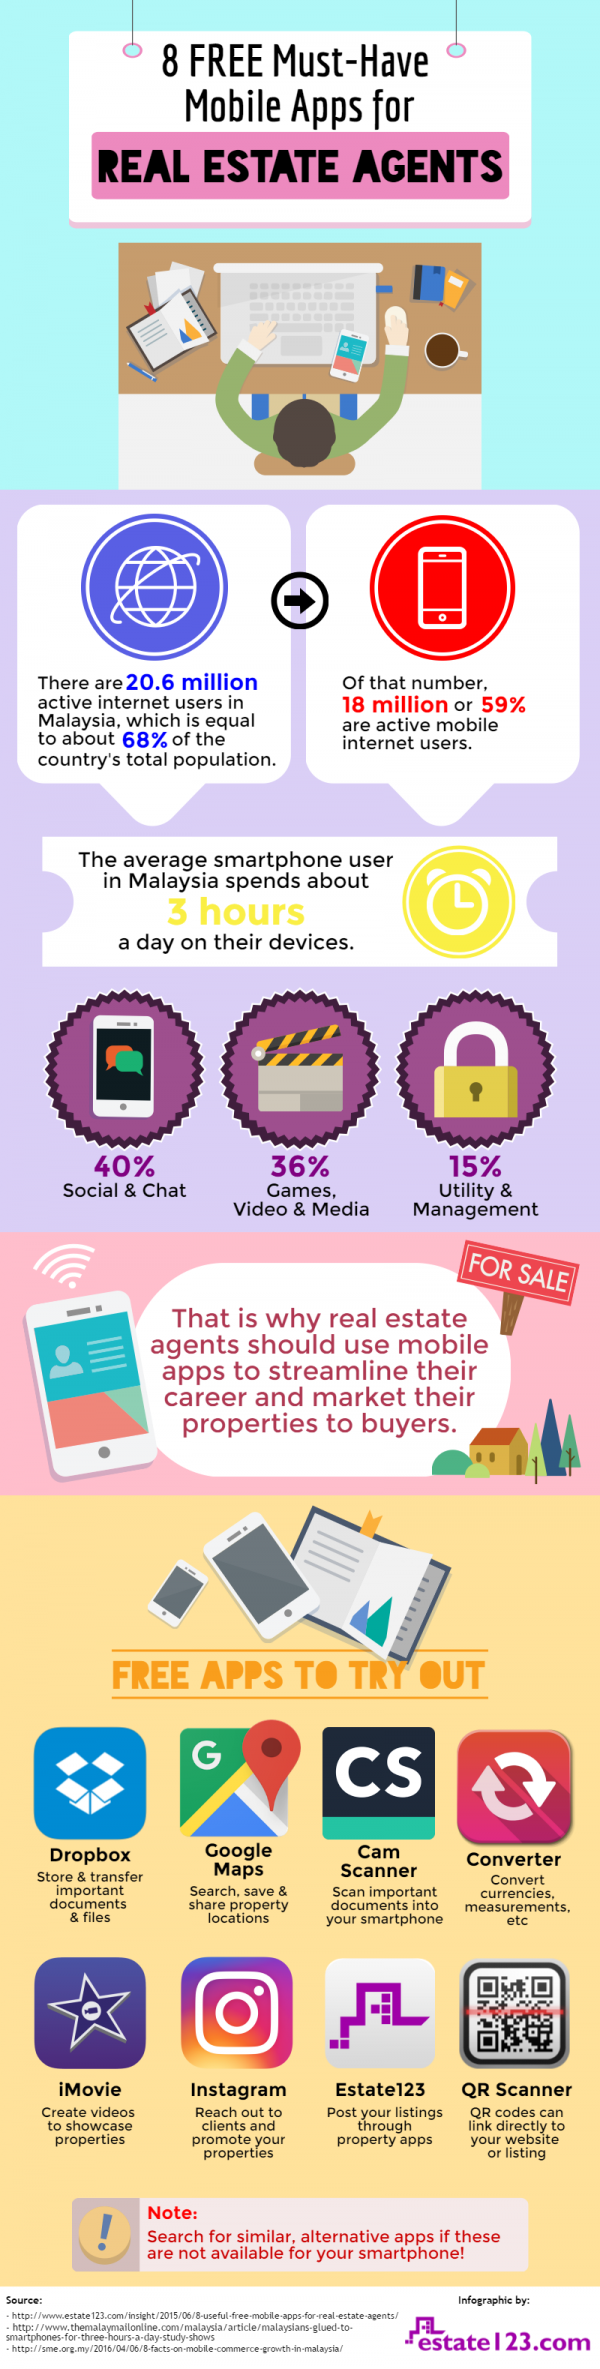 28-sept-2016-8-mobile-apps-for-agents